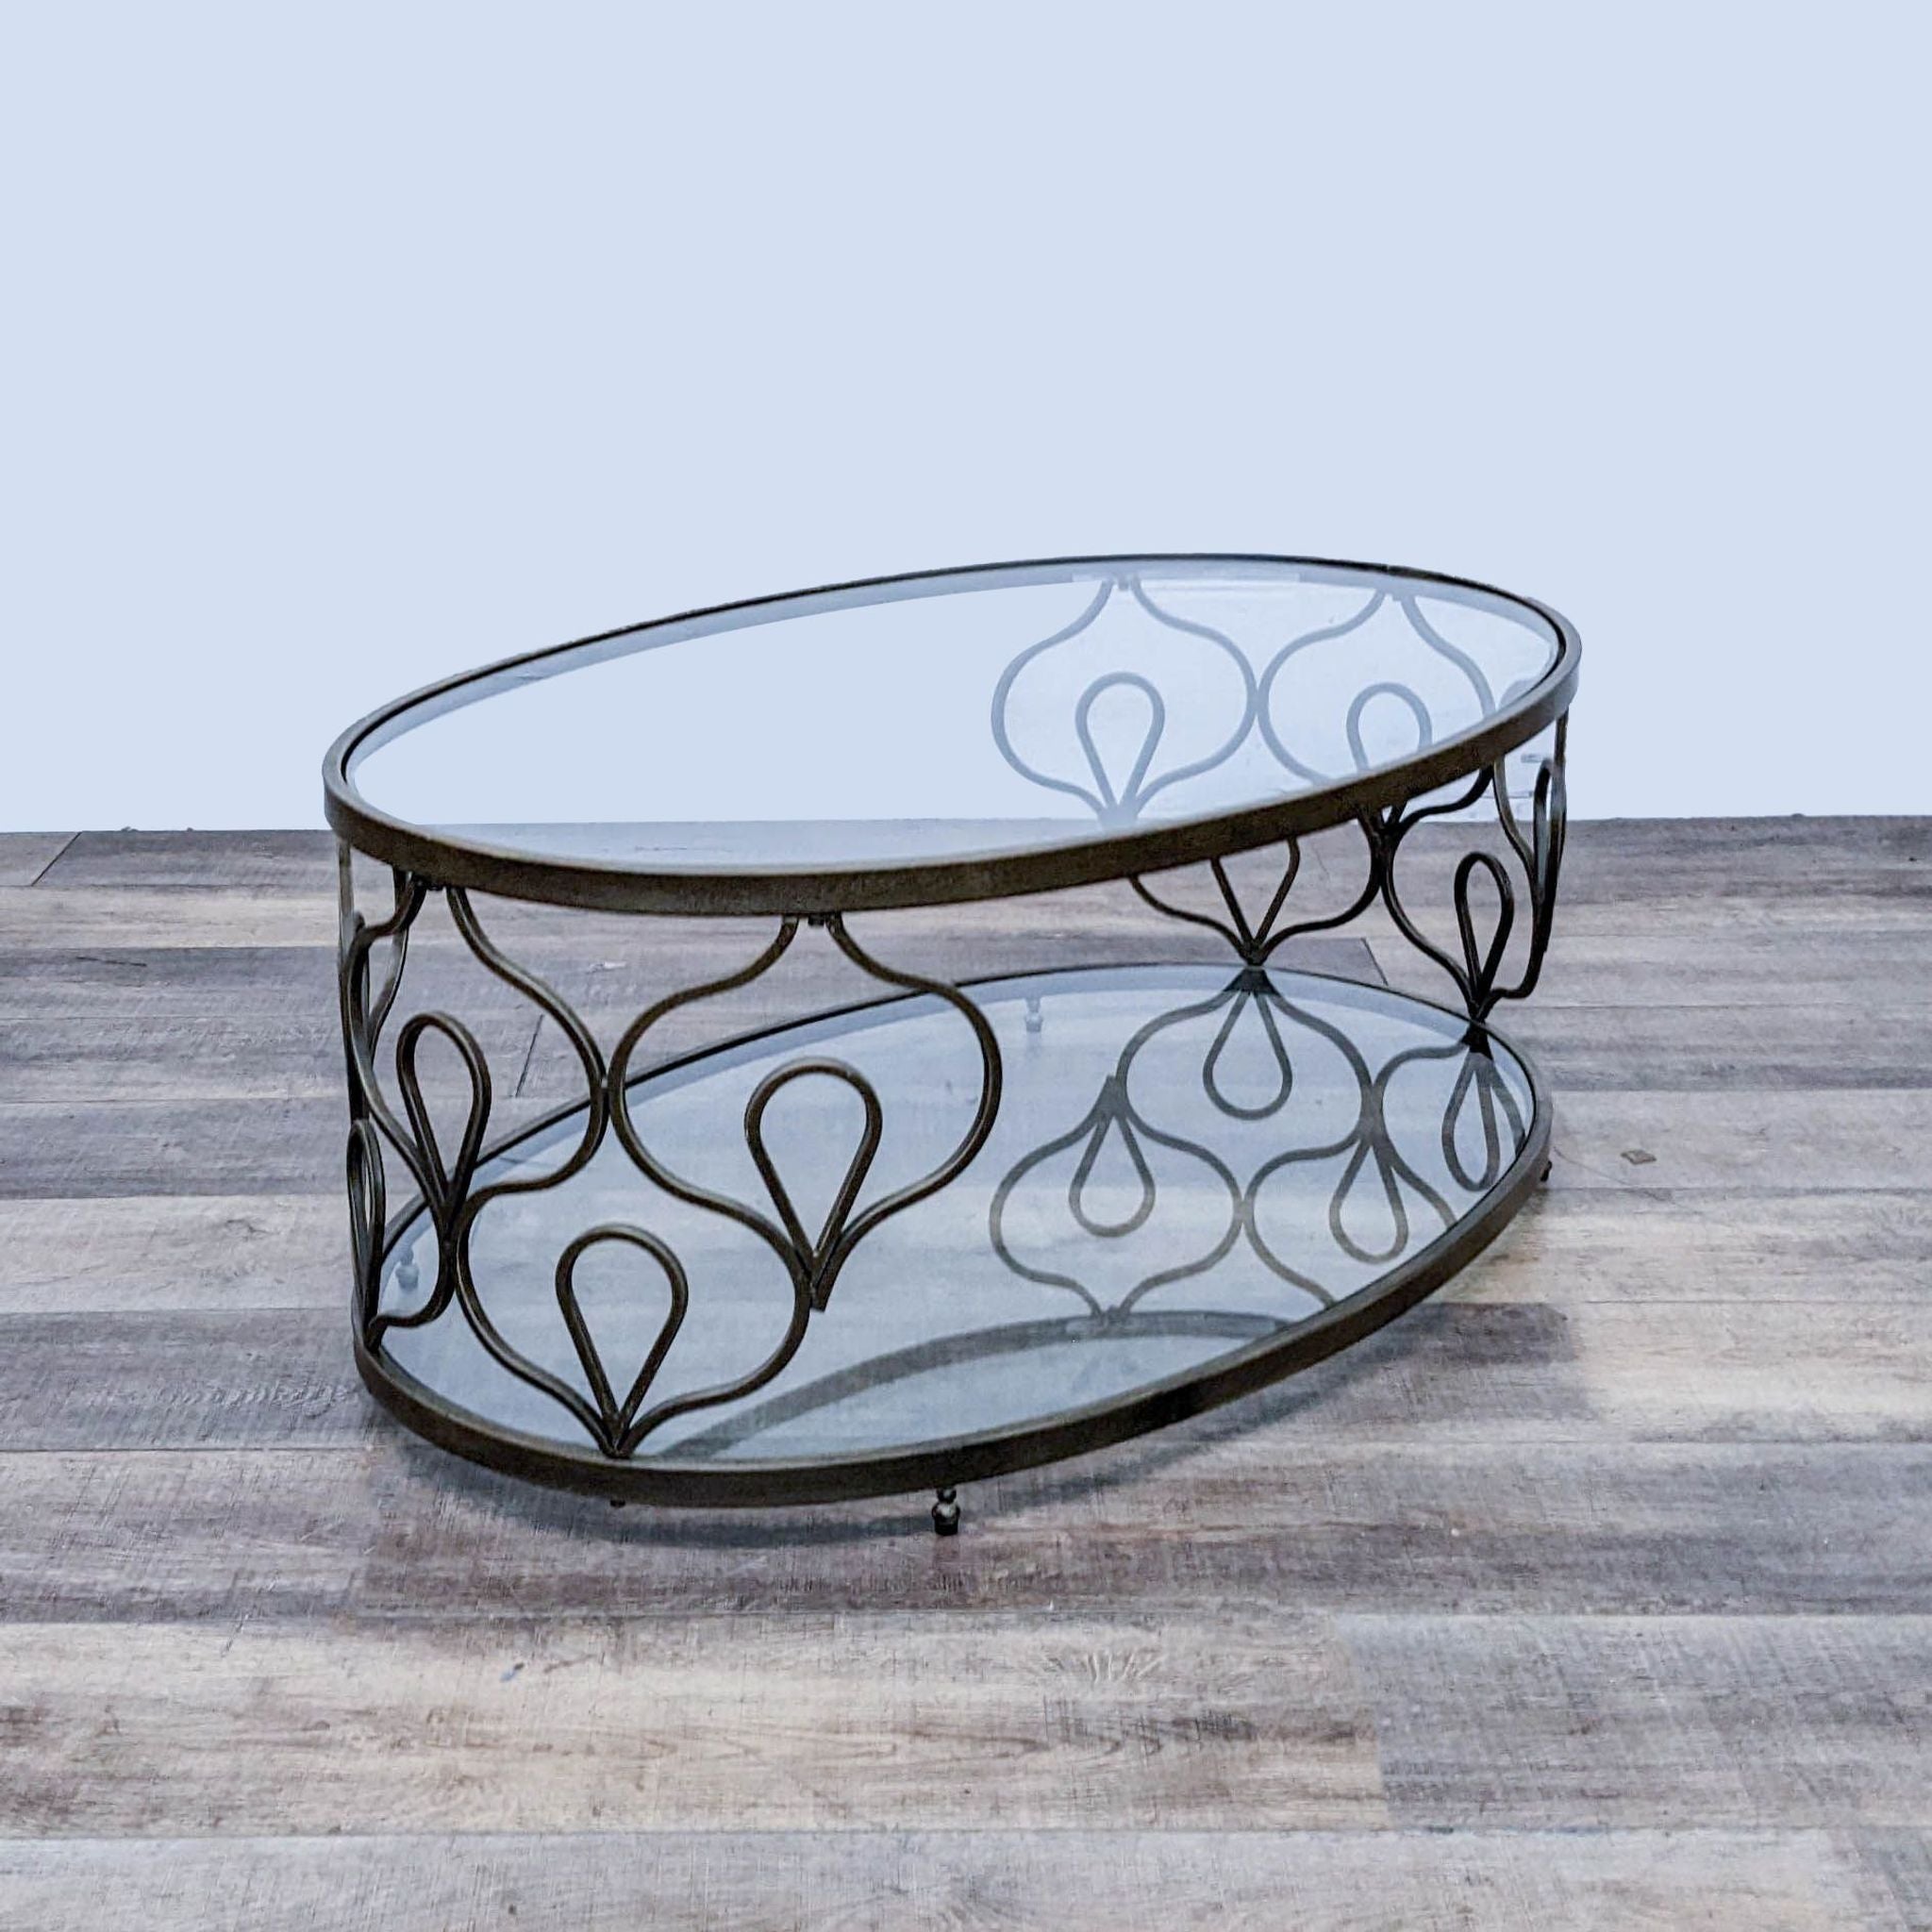 Reperch brand oval coffee table with glass top and decorative metal frame on wooden floor.